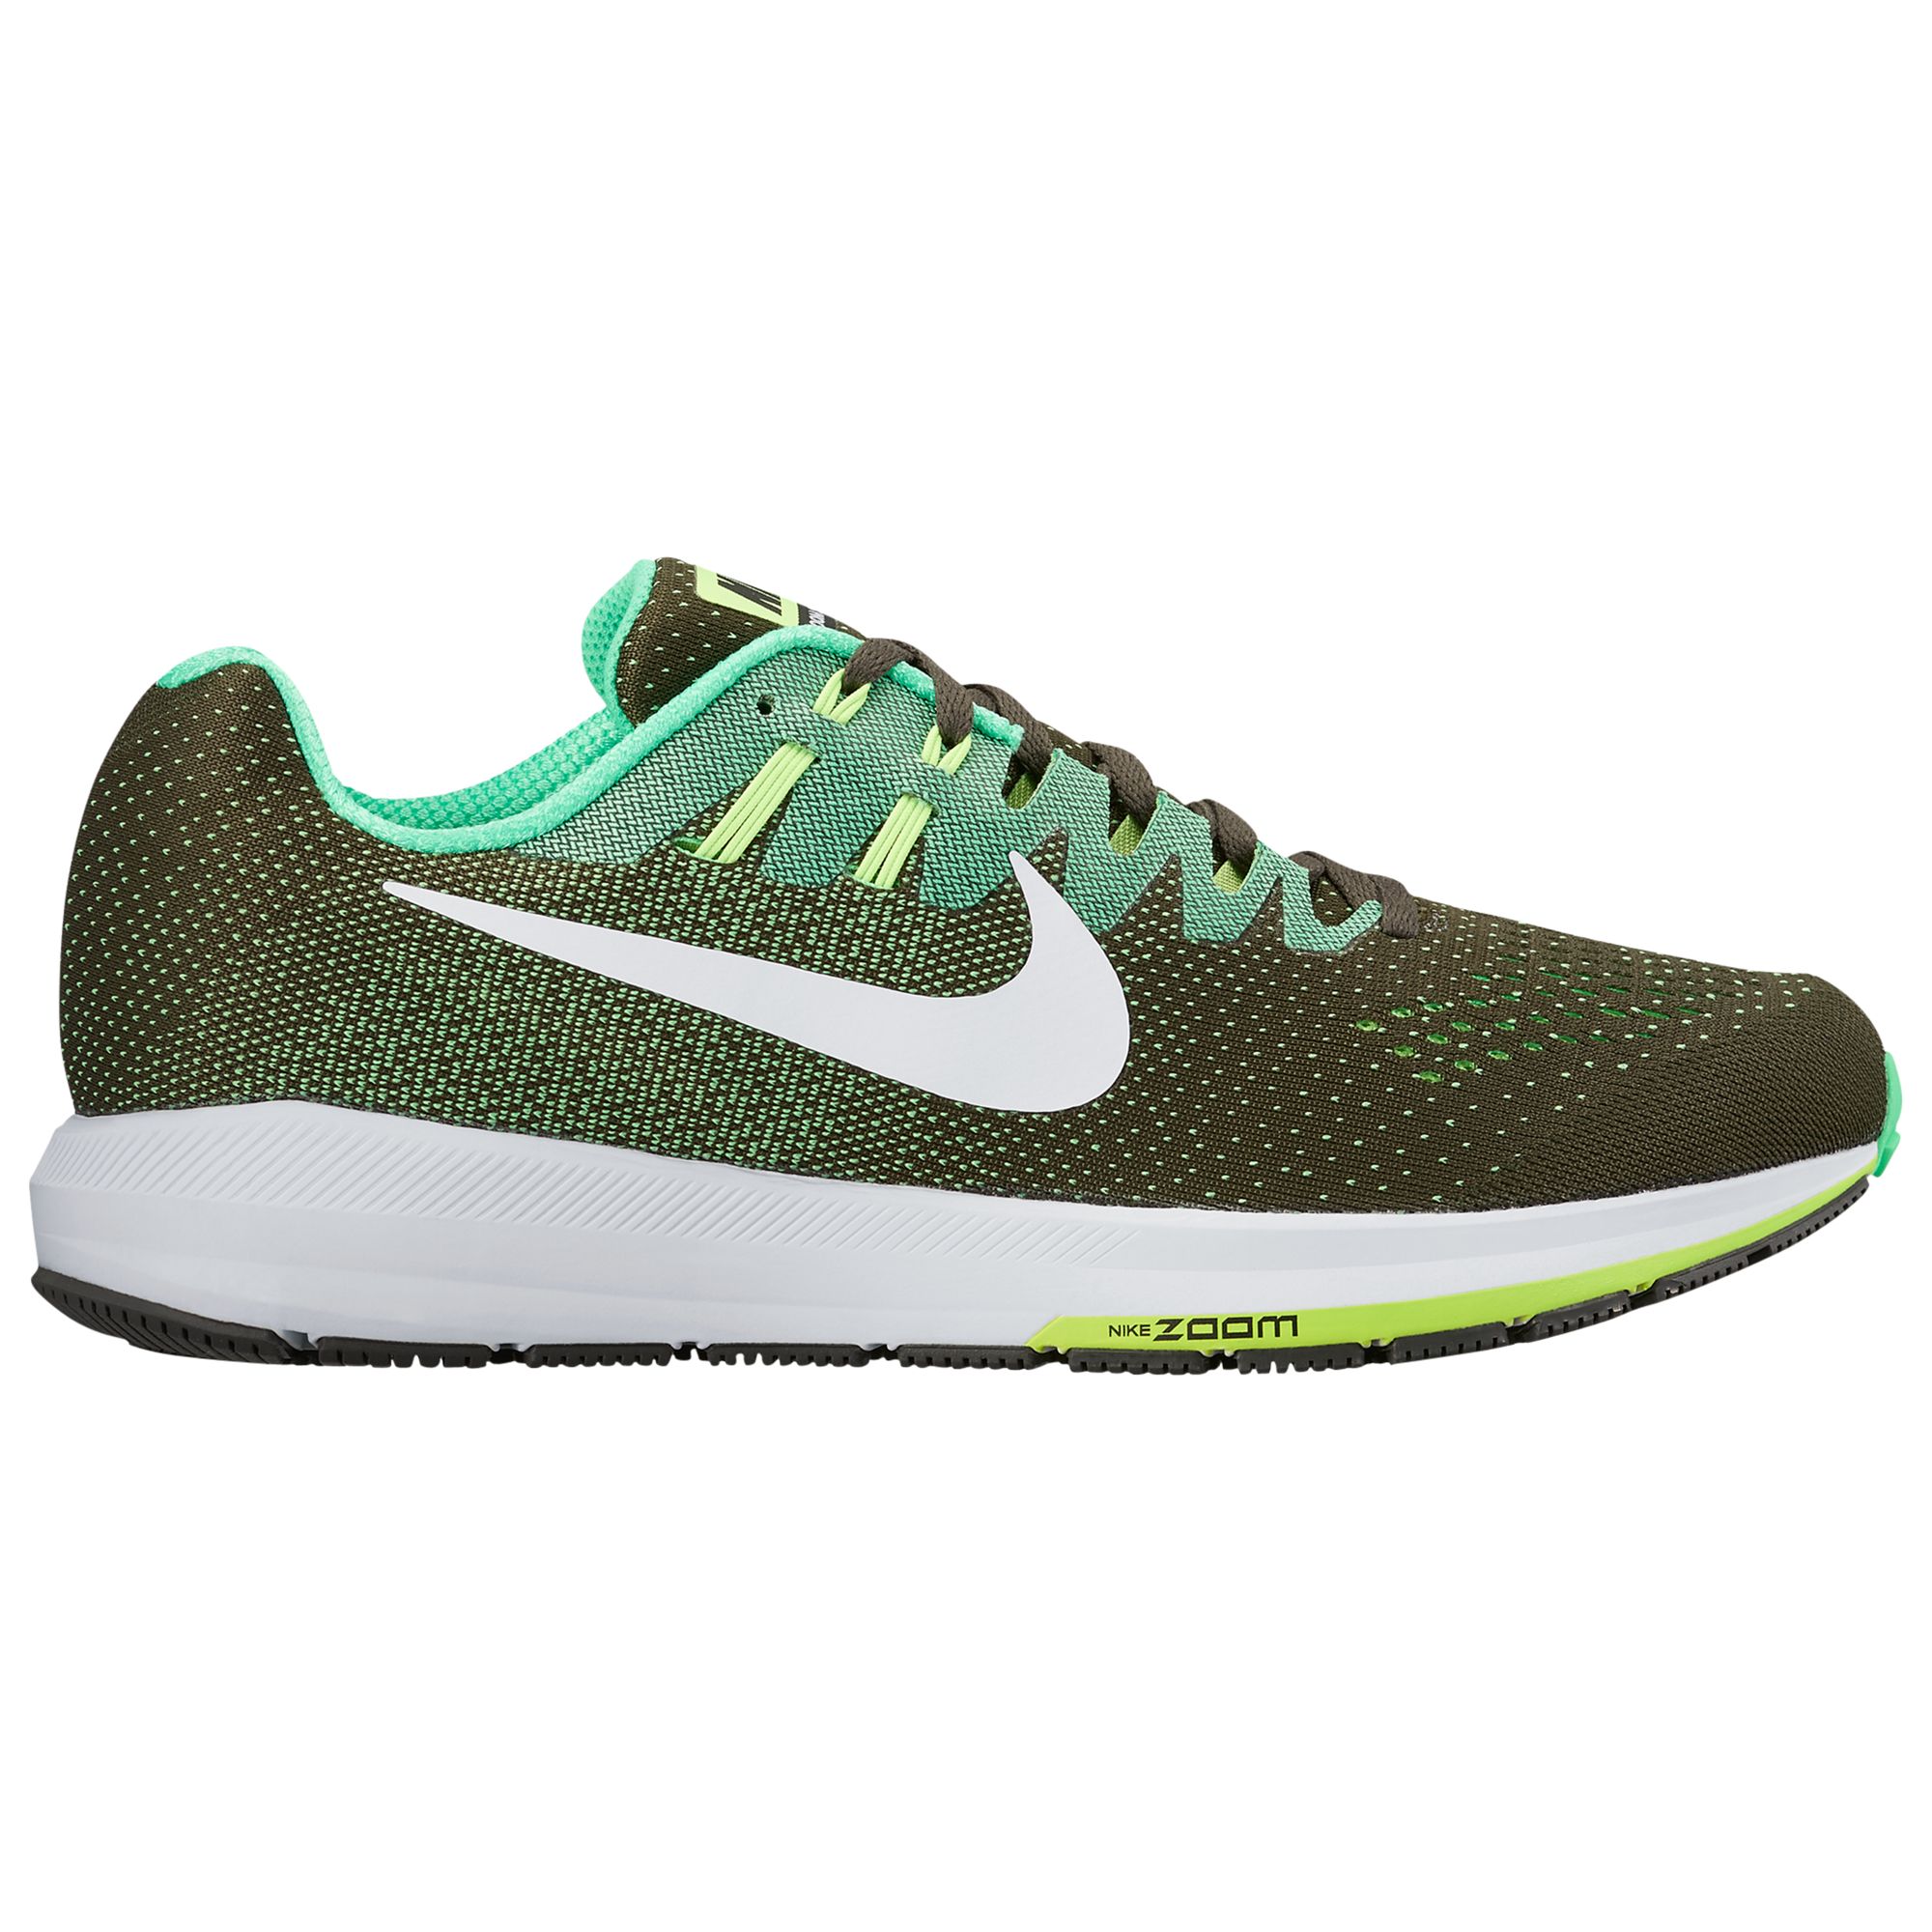 Nike Air Zoom Structure 20 Men's Running Shoes, Green